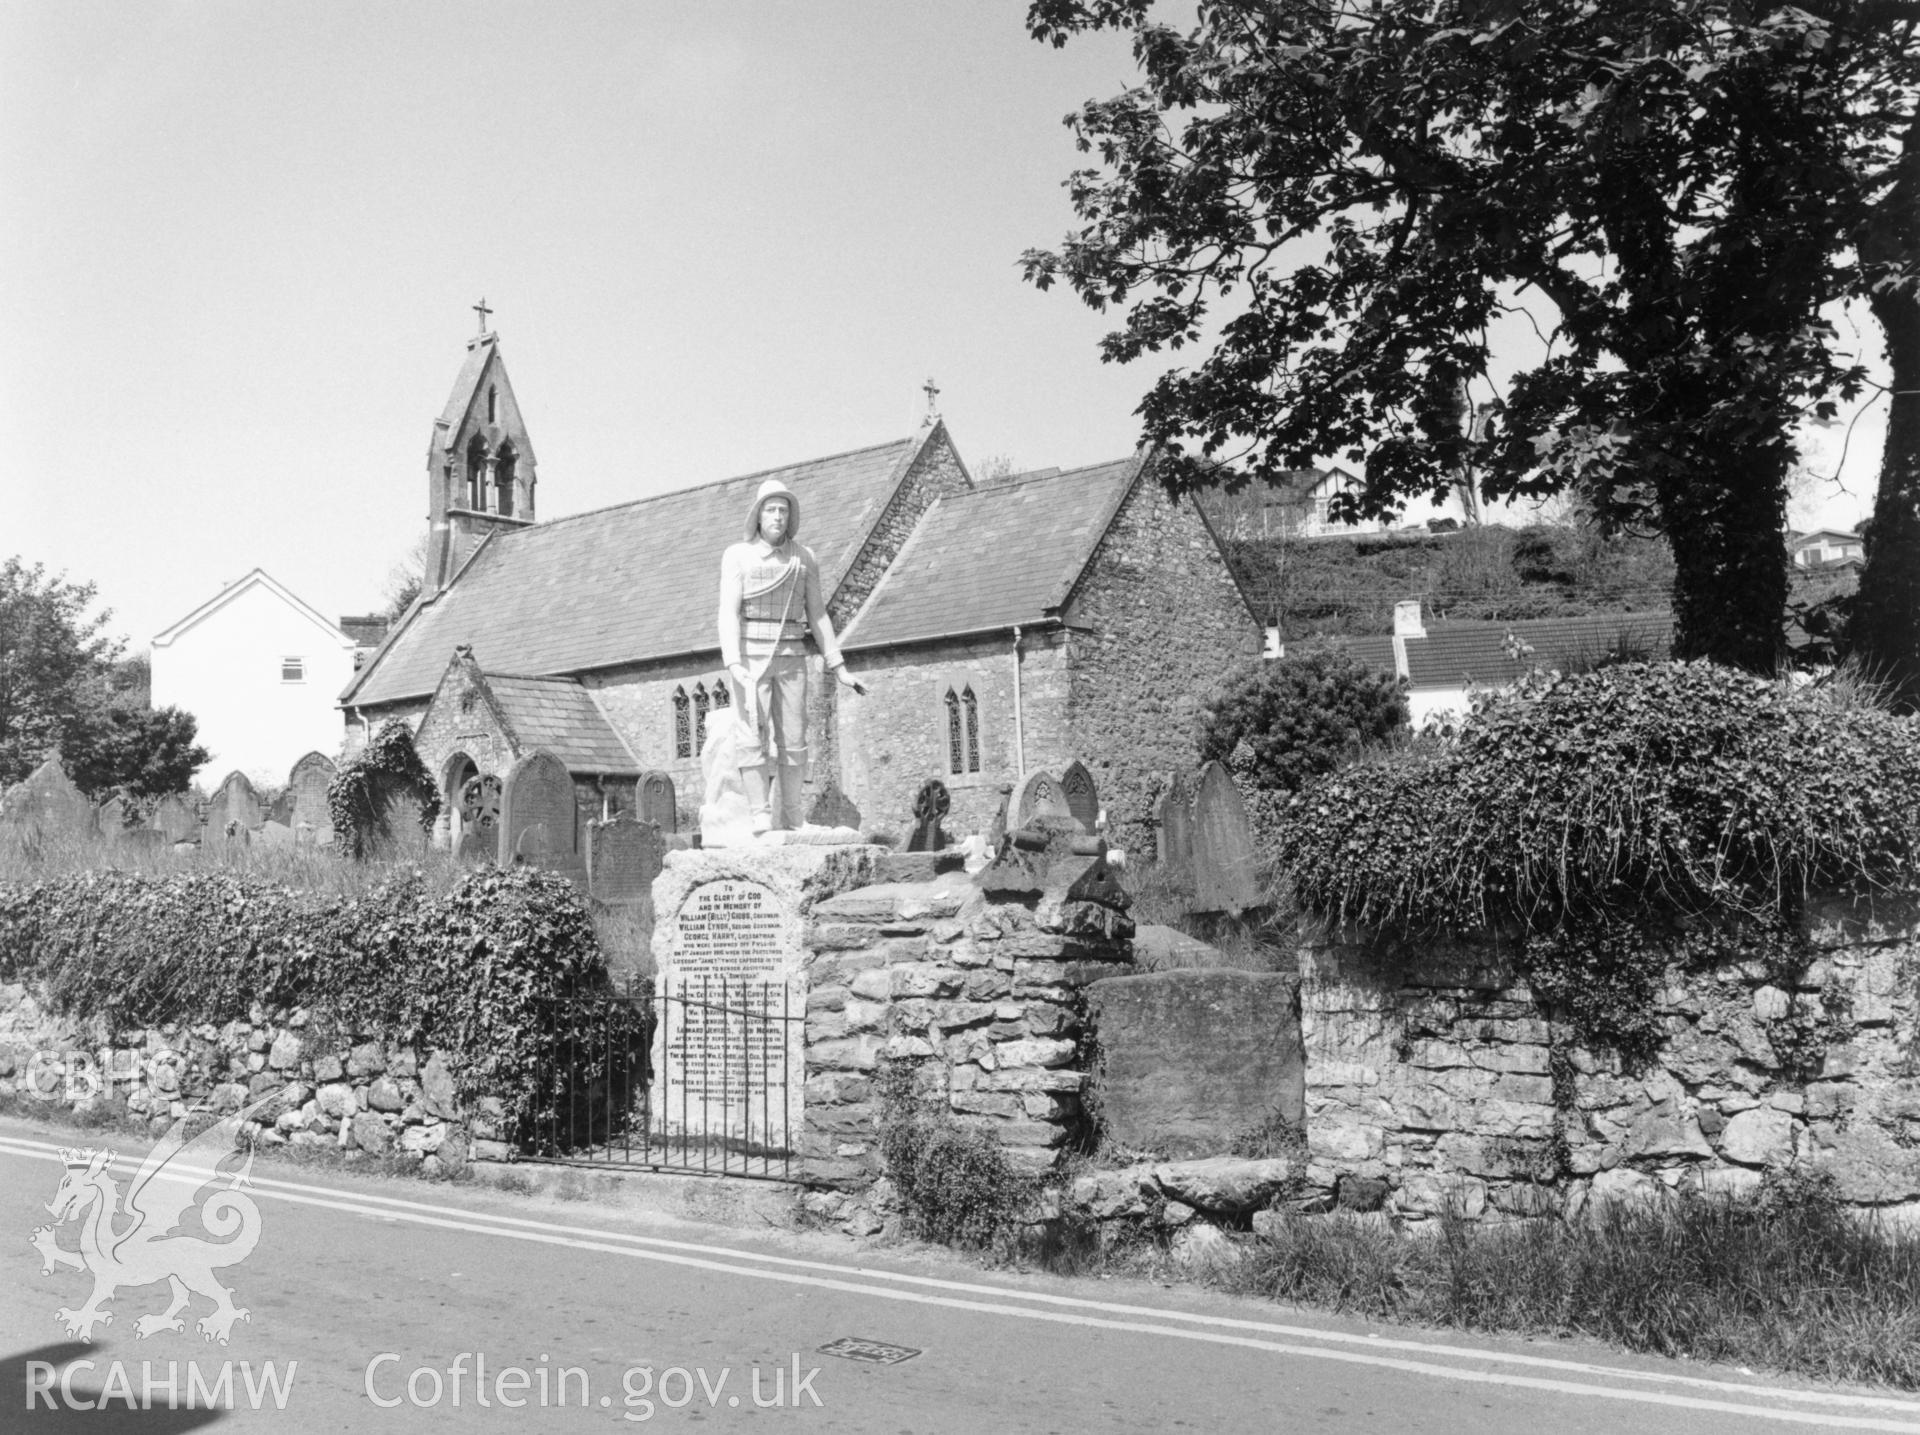 1 b/w print showing view of St Cadoc's Church, Port Eynon, showing RNLI memorial; collated by the former Central Office of Information.